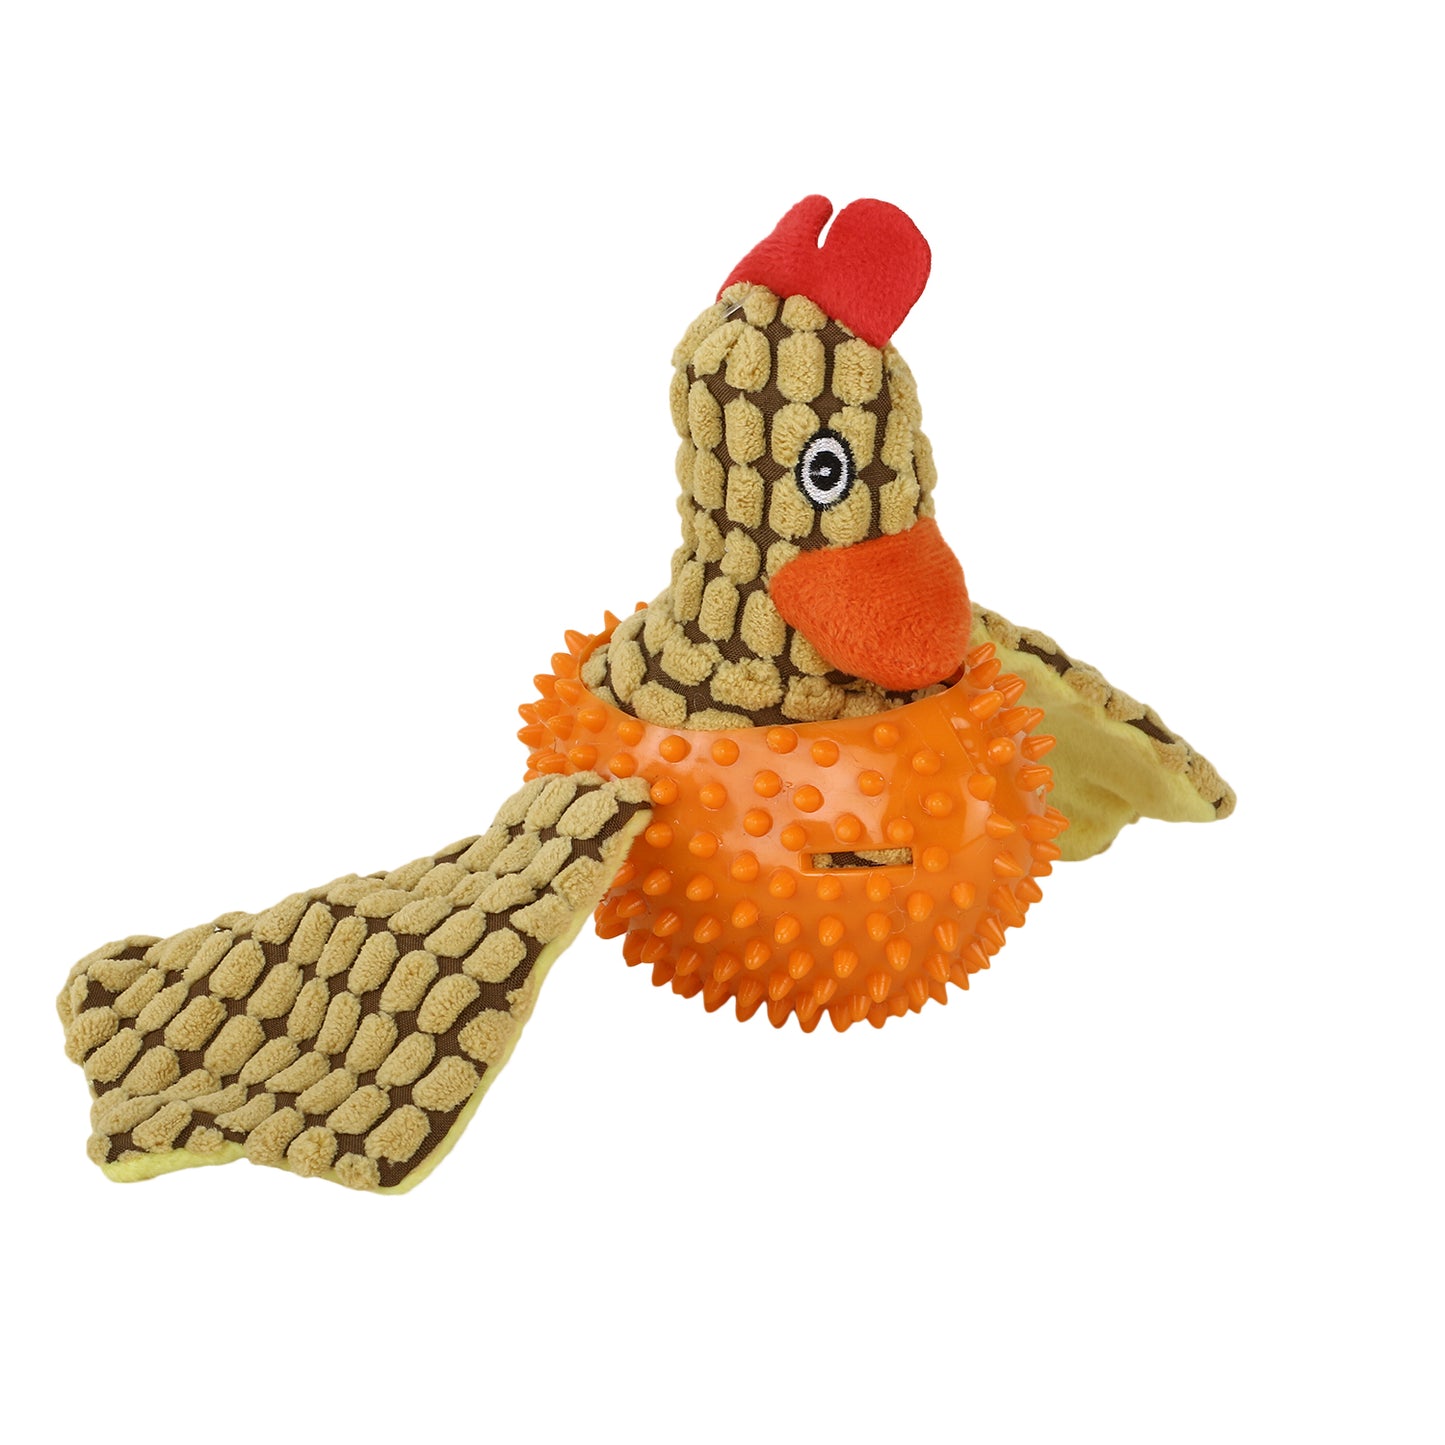 BASIL Bird Plush Pet Toy for Dogs & Puppies with Squeaky Neck (Orange)